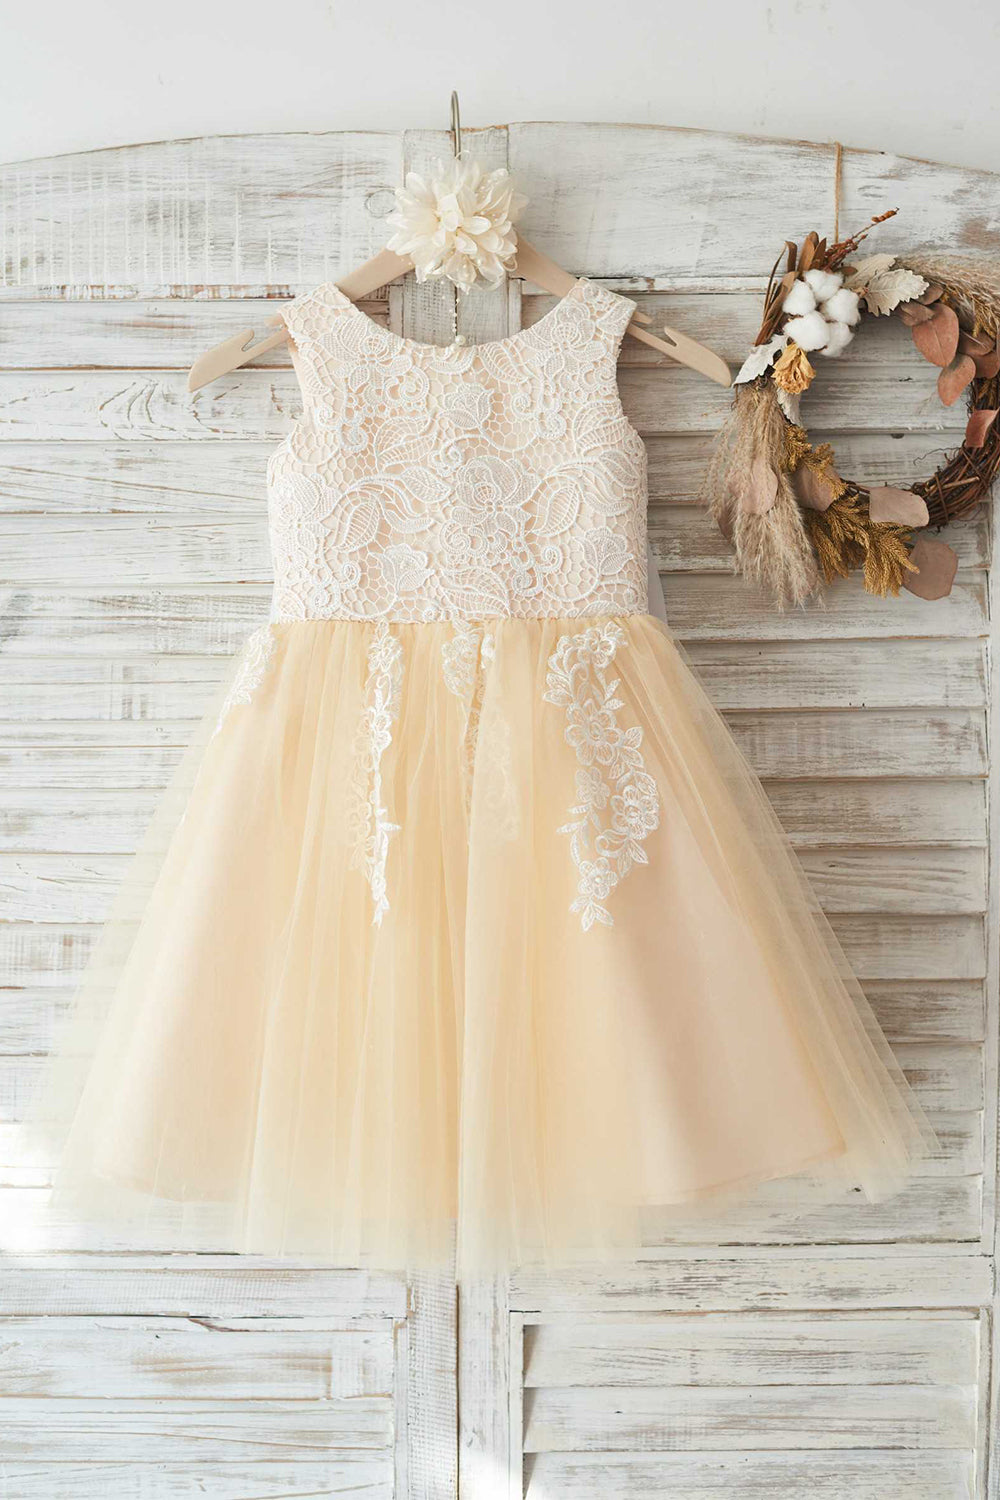 Leely Jewel Flower Girl Dress Champagne Little Girl Dress with Lace Bowknot